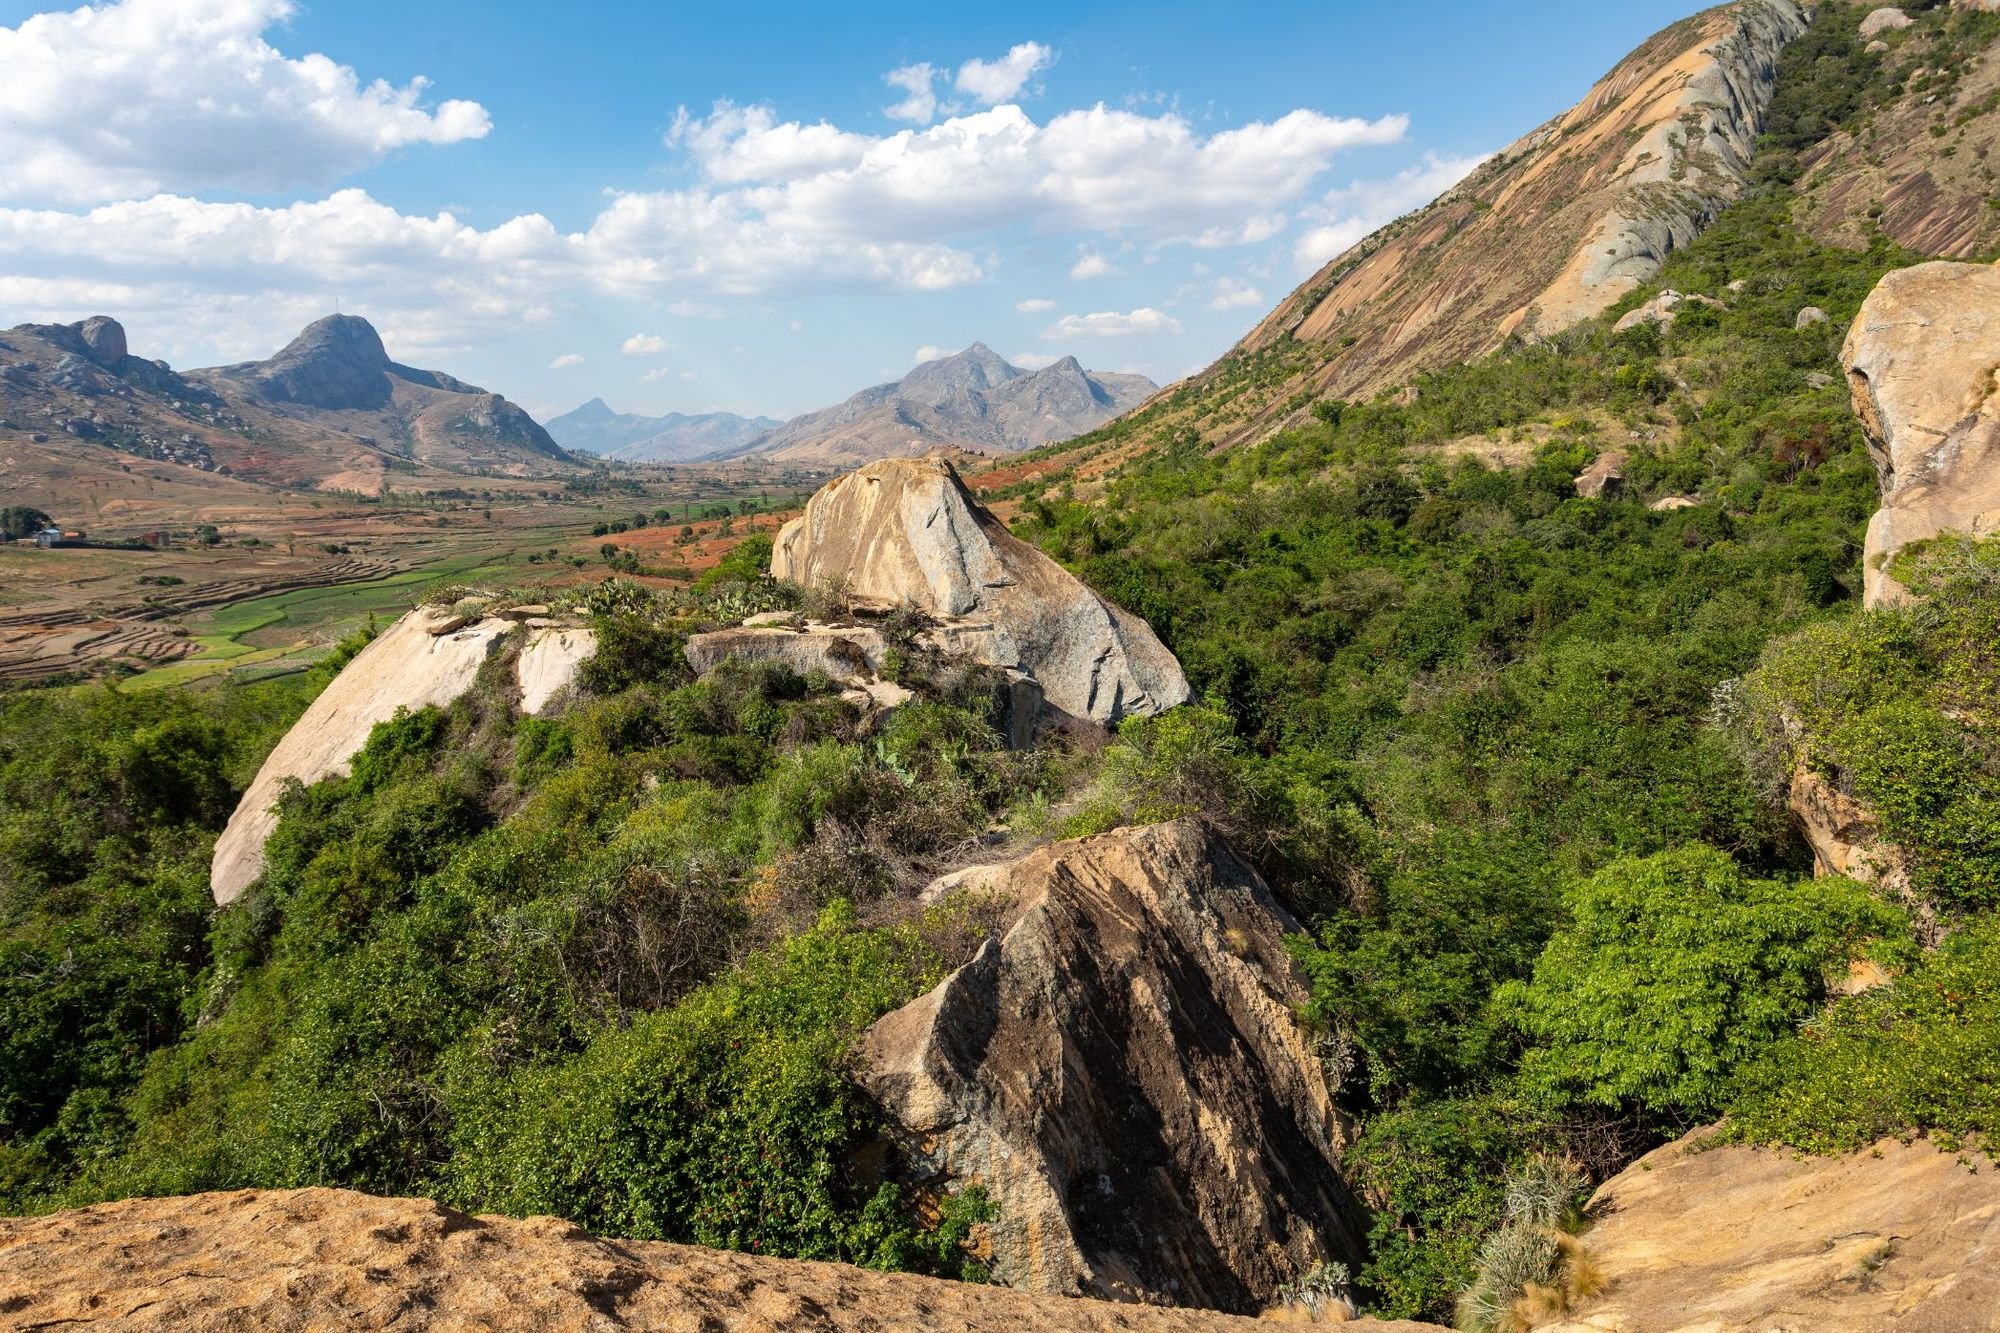 A far-reaching view over the mountains from one of the hiking trails at the Anja Community Reserve.  Photo: Getty